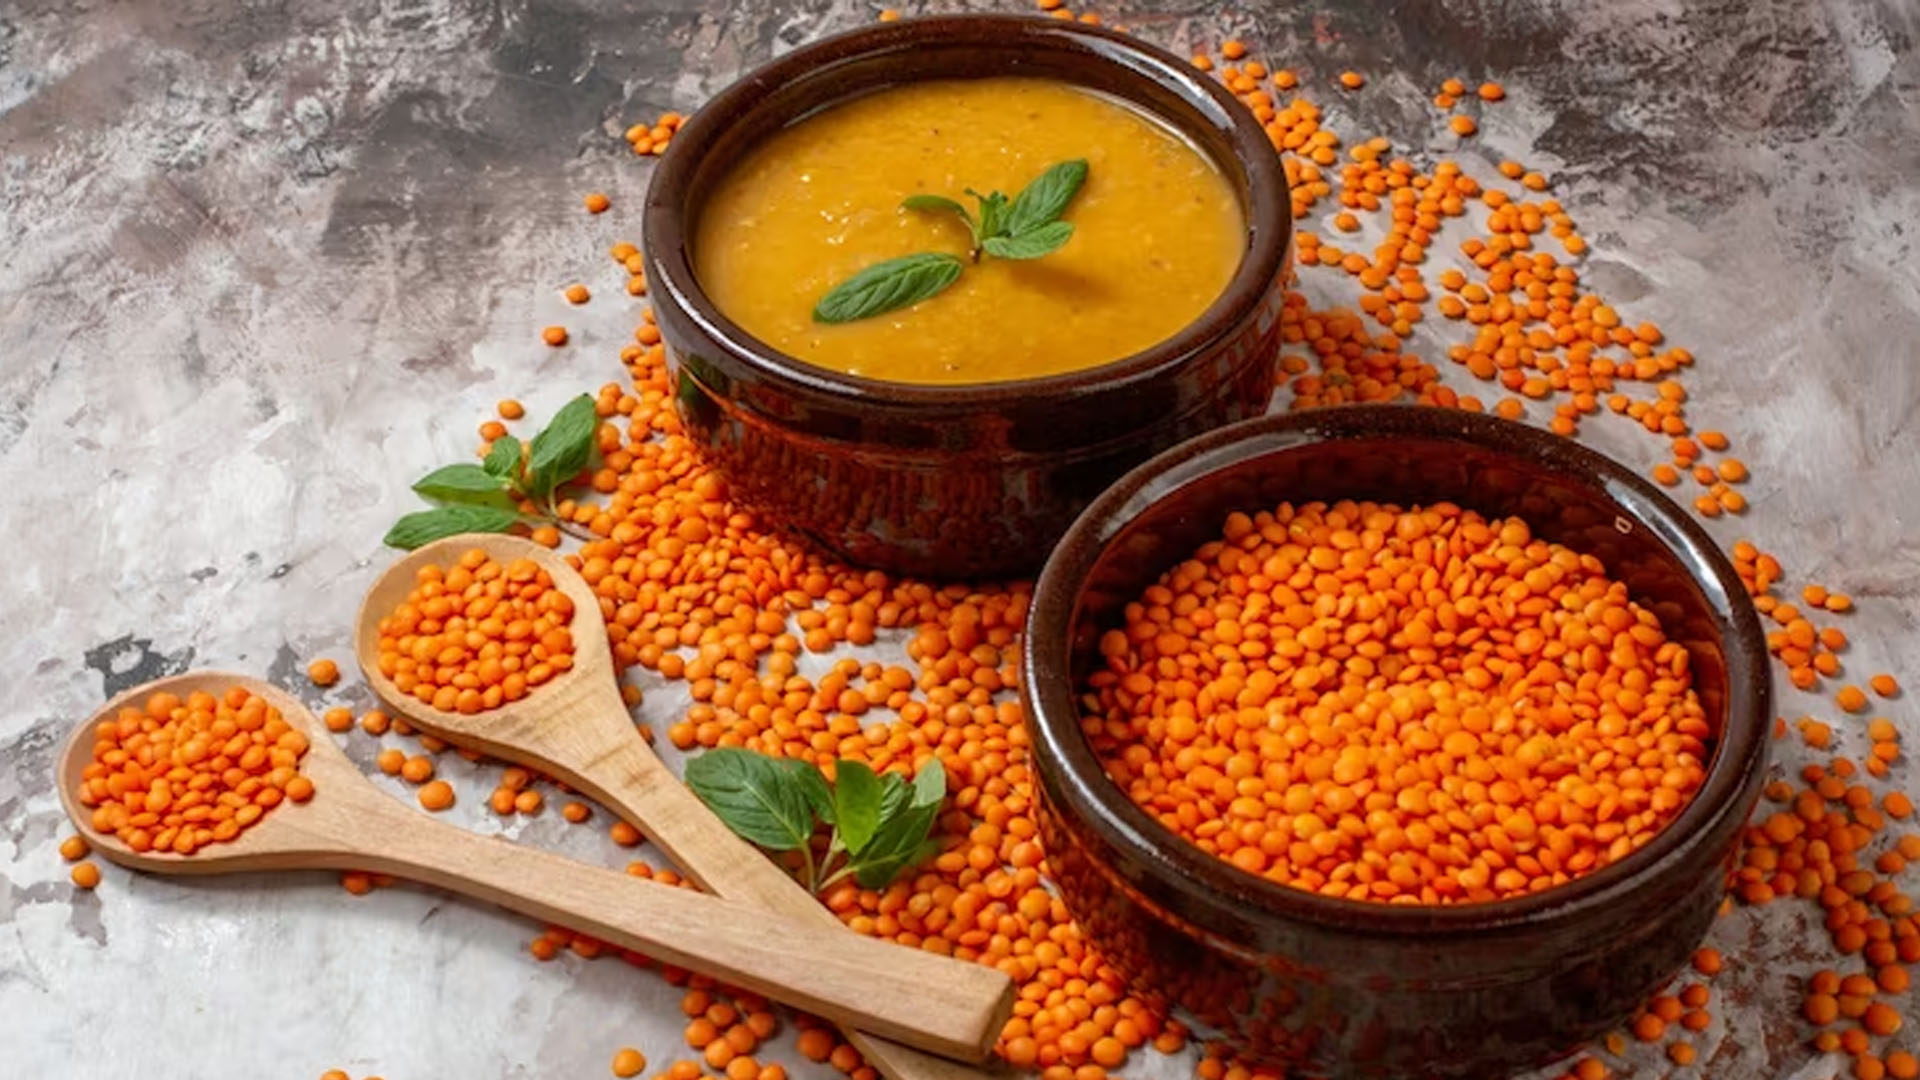 What Are The Health Benefits of Urad Dal?